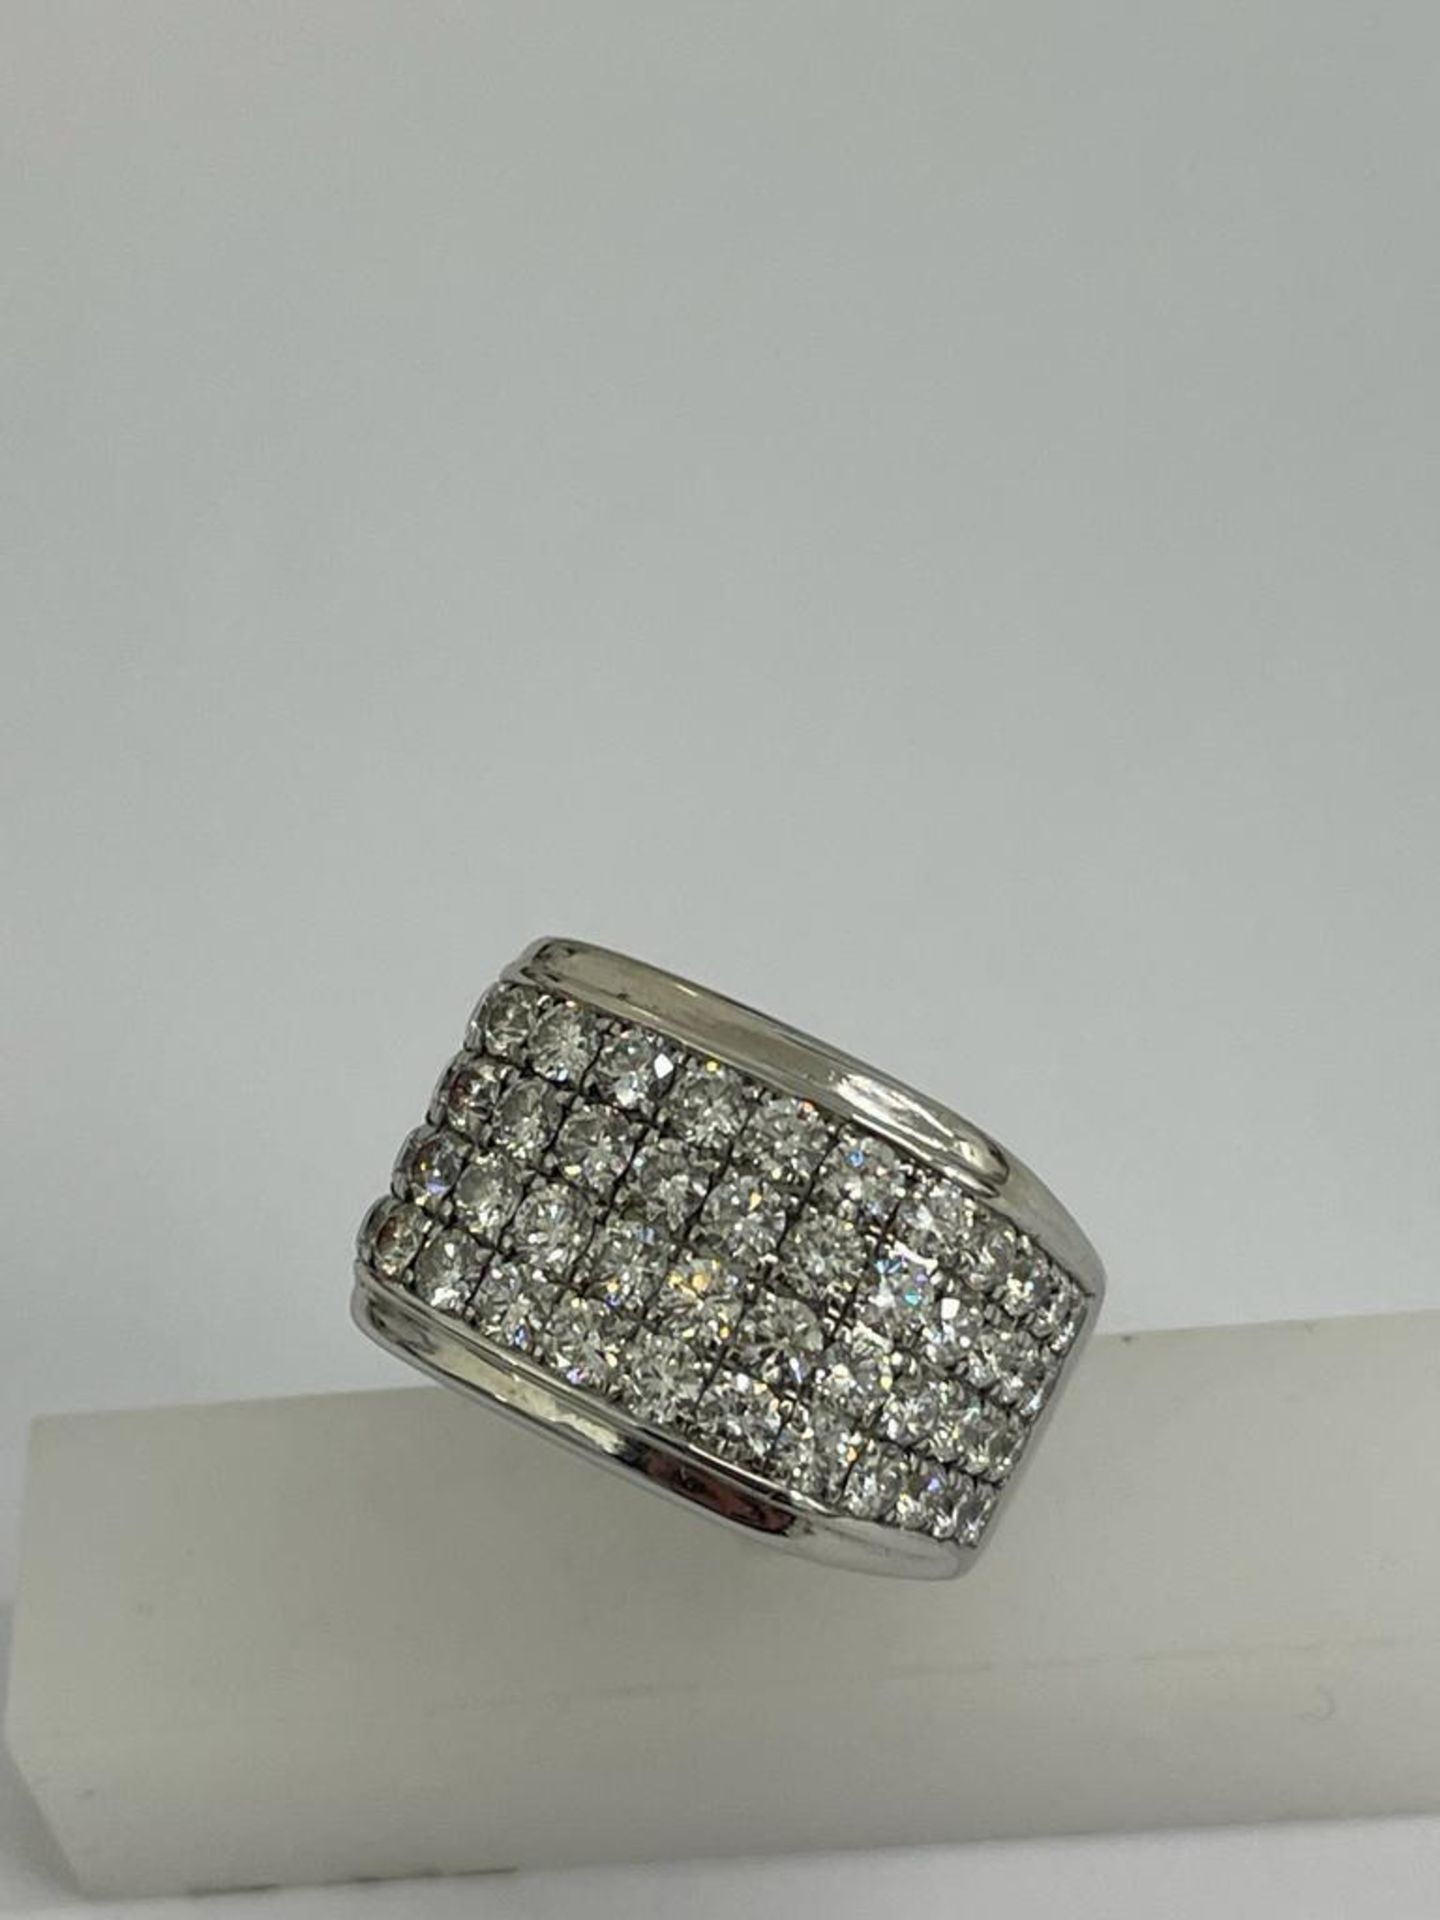 A GENTLEMAN'S 14 CARAT WHITE GOLD RING SET WITH APPROXIMATELY 5 CARATS OF BRILLIANT CUT DIAMONDS, - Image 5 of 8